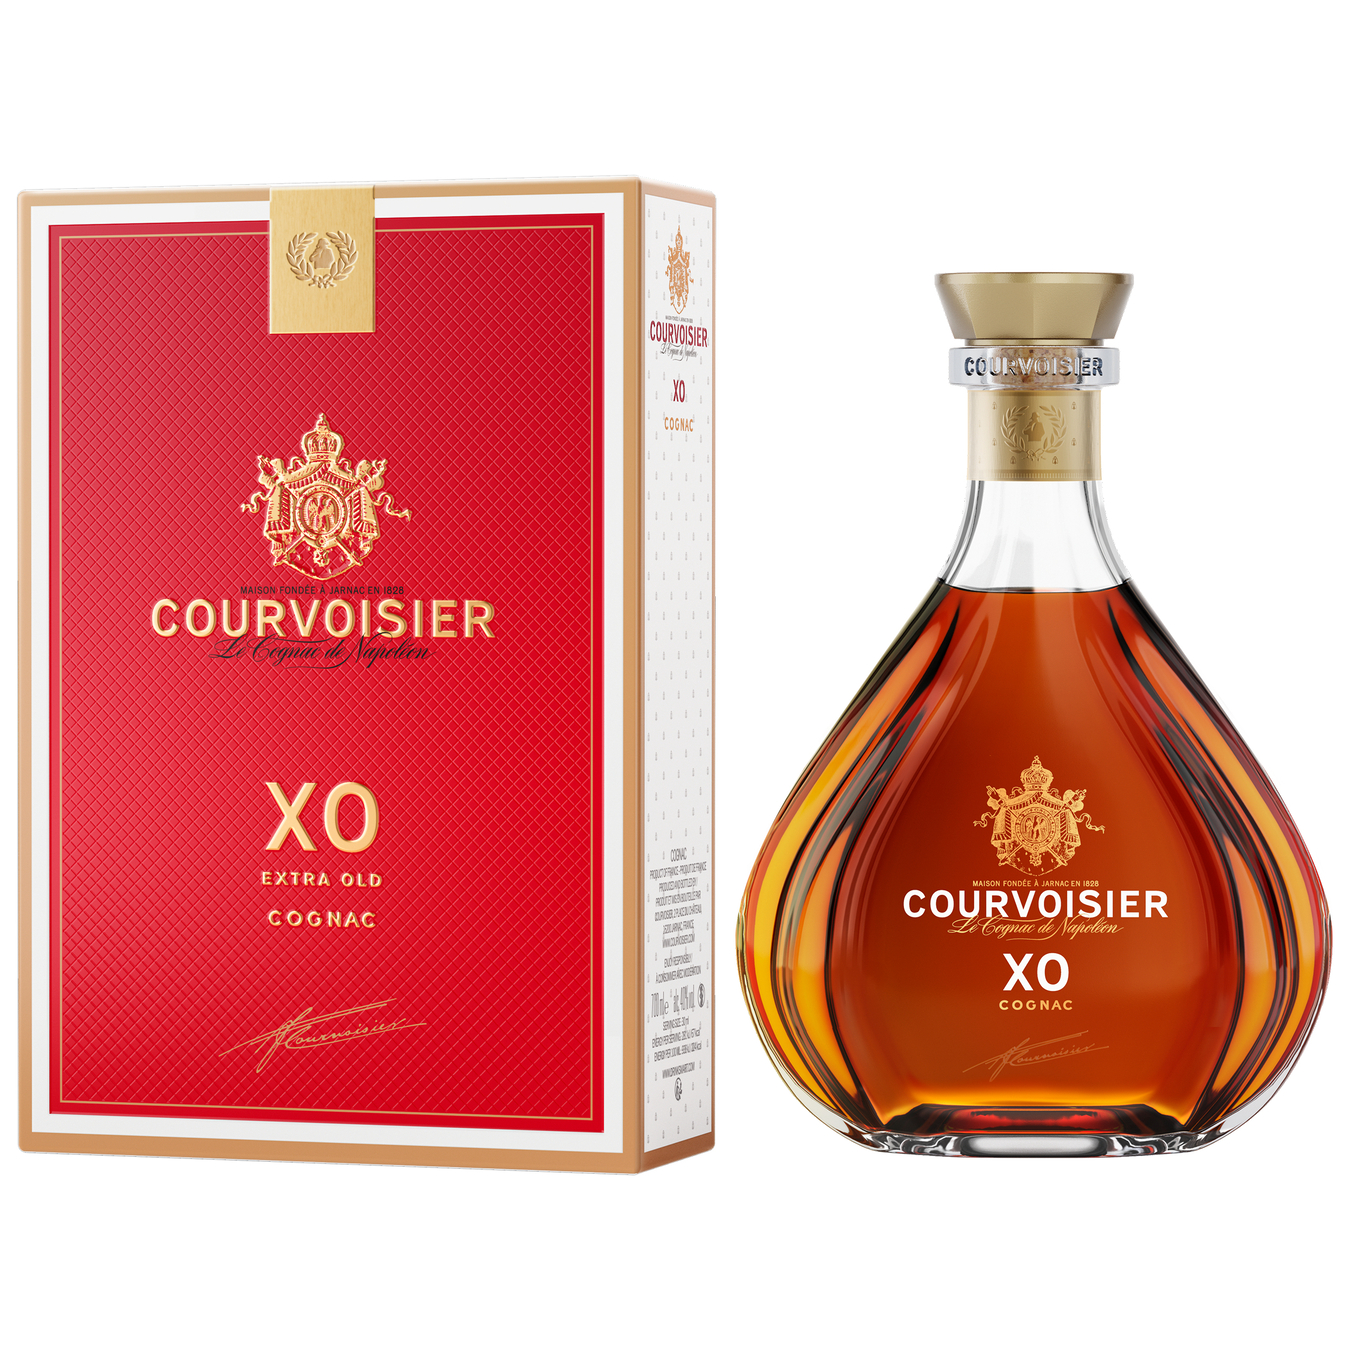 Cognac Courvoisier imperial H.O. 40% in a box of 0.7 l